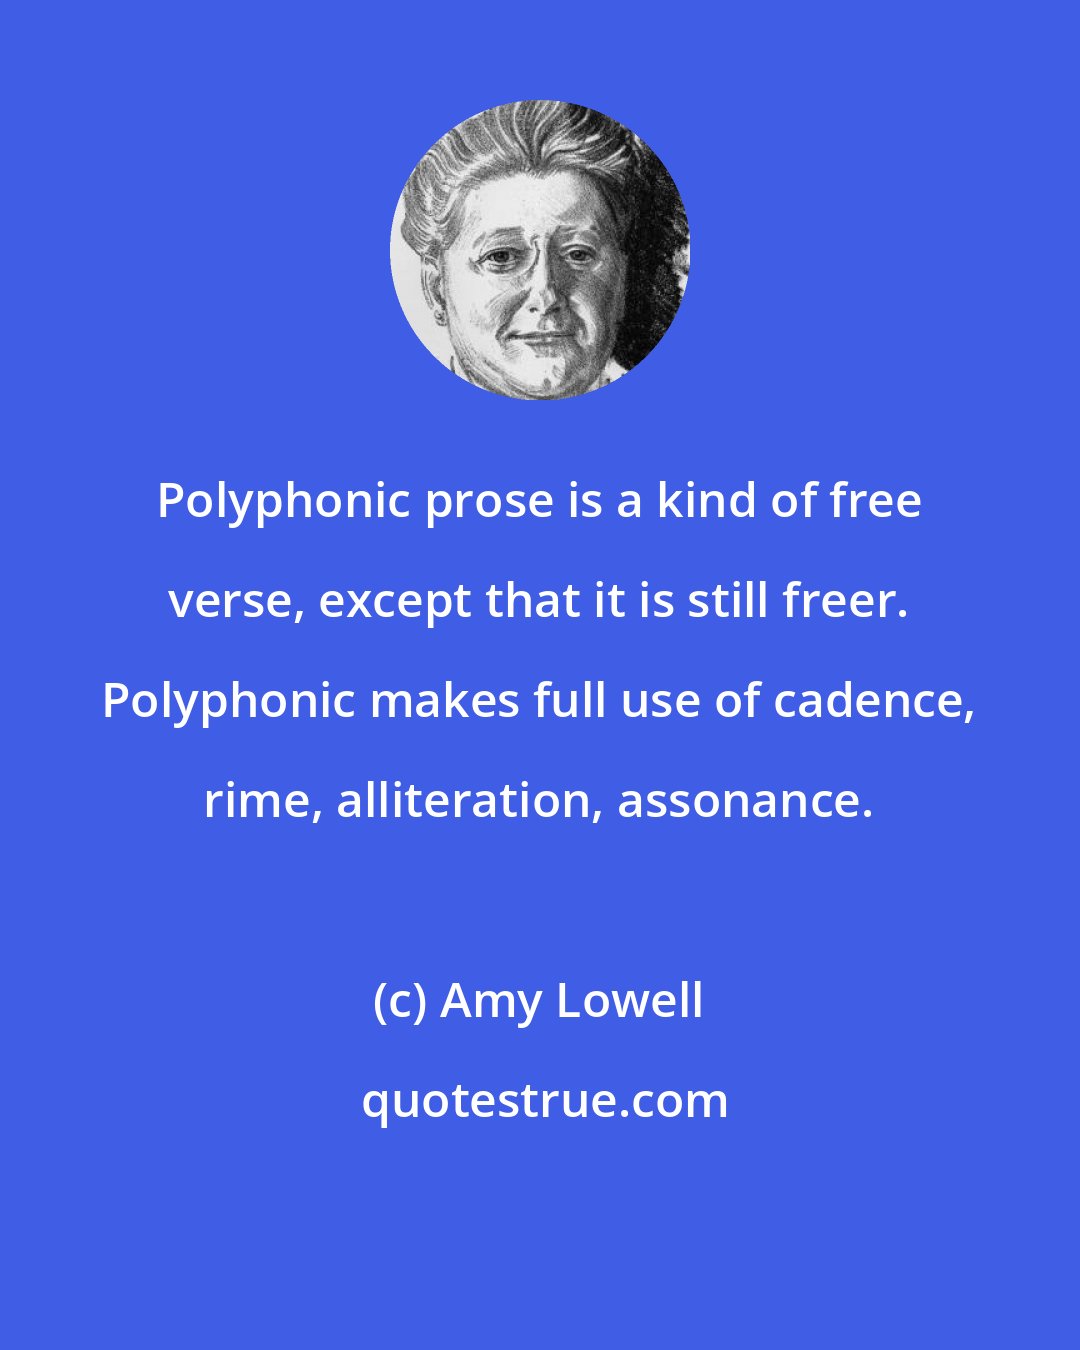 Amy Lowell: Polyphonic prose is a kind of free verse, except that it is still freer. Polyphonic makes full use of cadence, rime, alliteration, assonance.